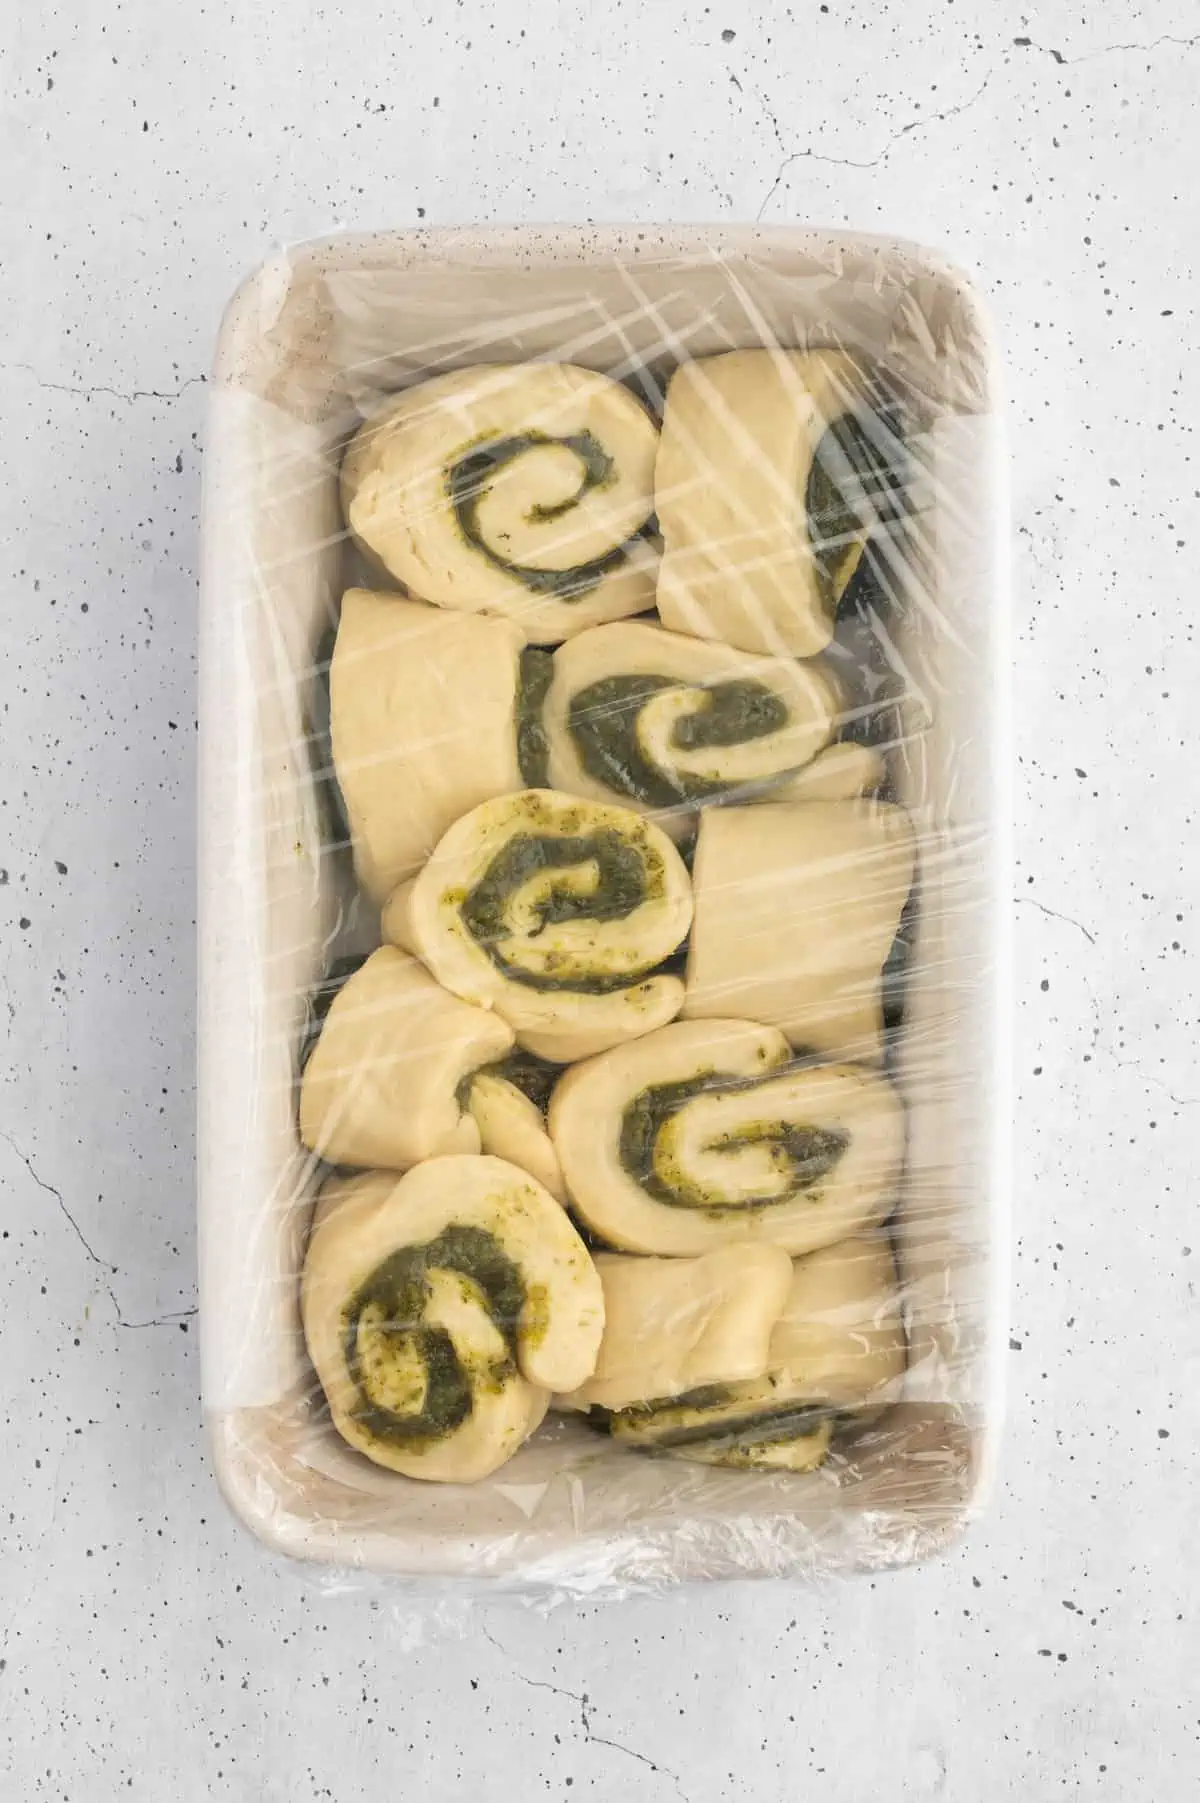 Pesto bread pieces assembled in a baking sheet to rise.